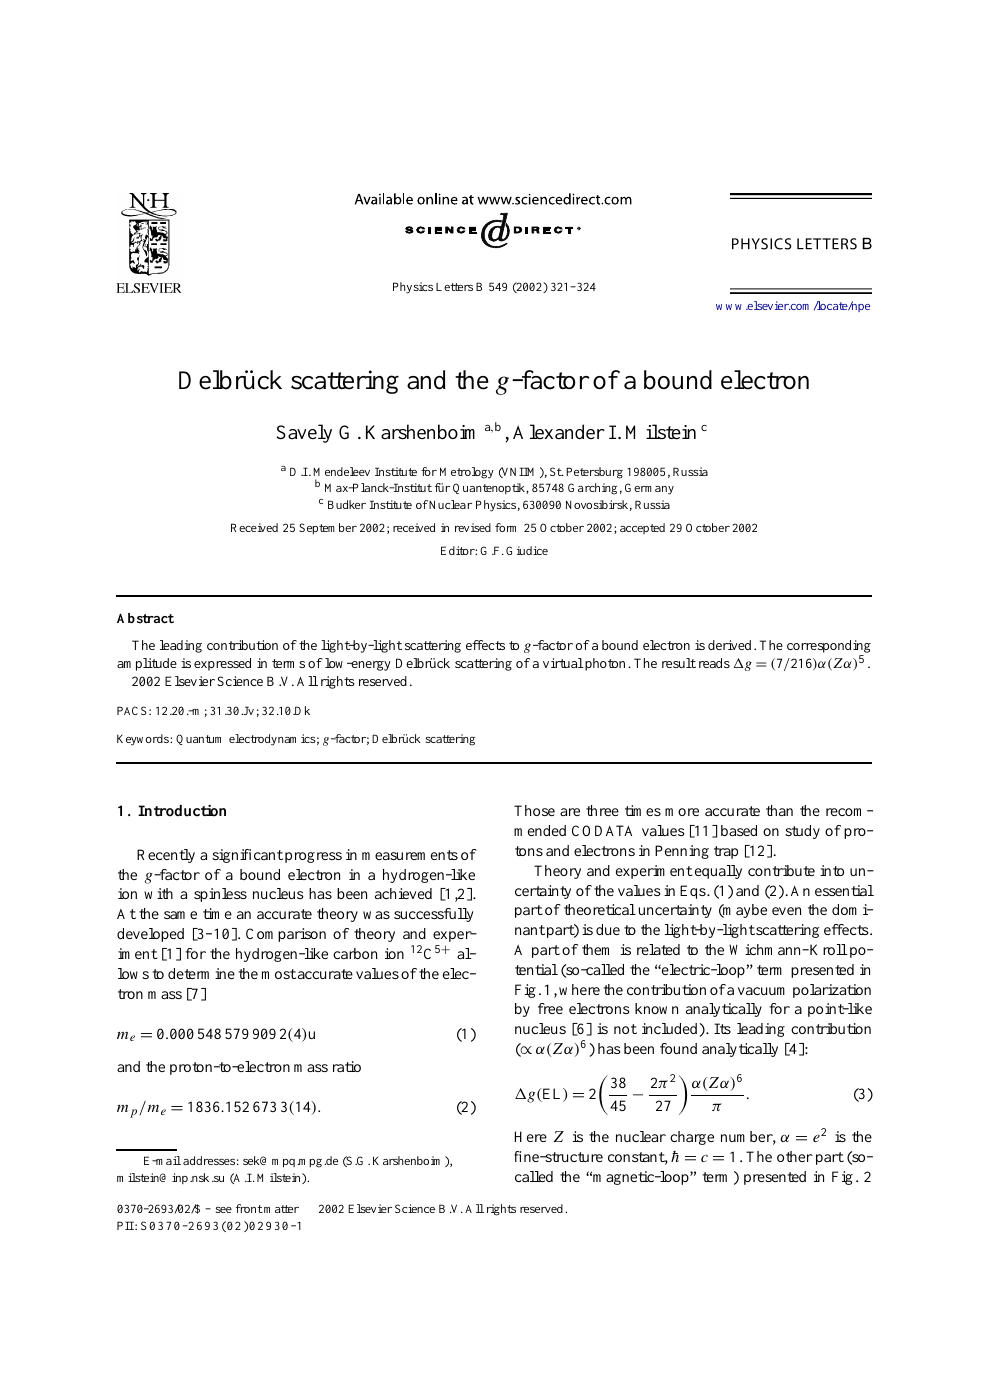 Delbruck Scattering And The G Factor Of A Bound Electron Topic Of Research Paper In Physical Sciences Download Scholarly Article Pdf And Read For Free On Cyberleninka Open Science Hub